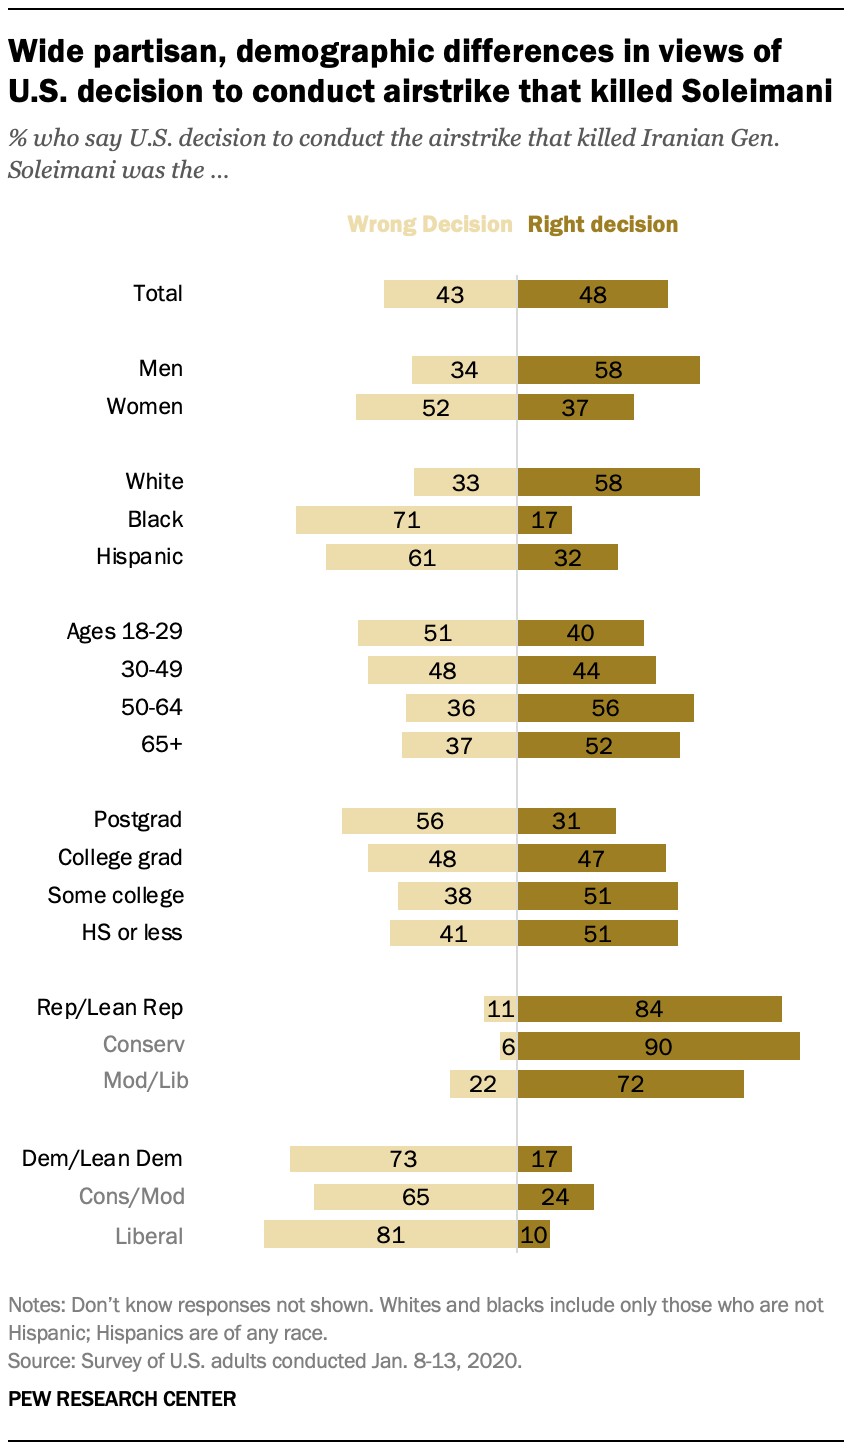 A chart shows wide partisan, demographic differences in views of U.S. decision to conduct airstrike that killed Soleimani 